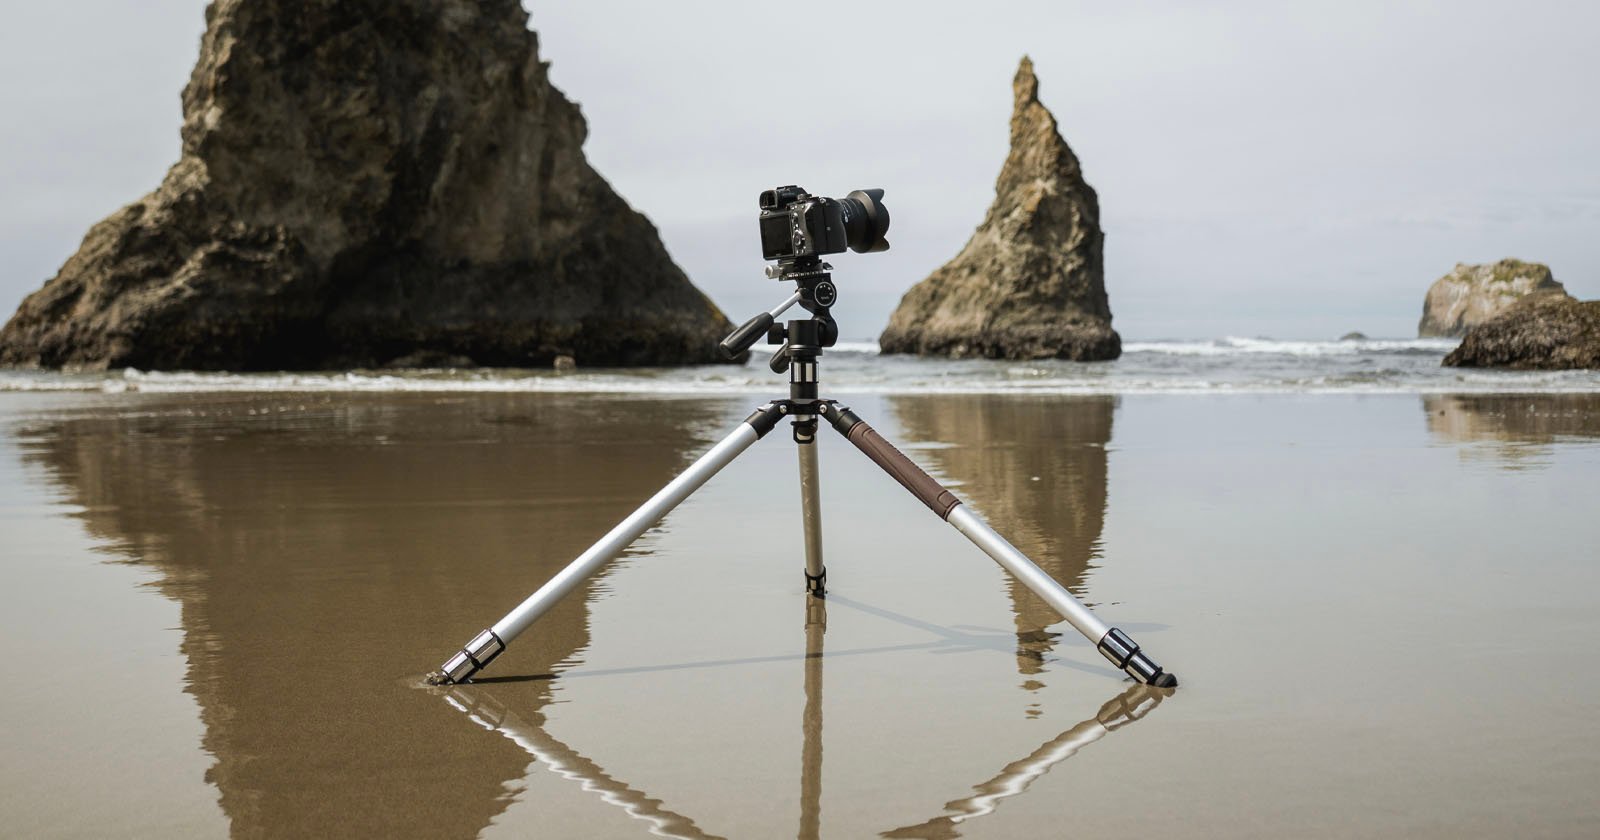 The Promaster Epoch is Like Your First Tripod, But is Actually Well-Made